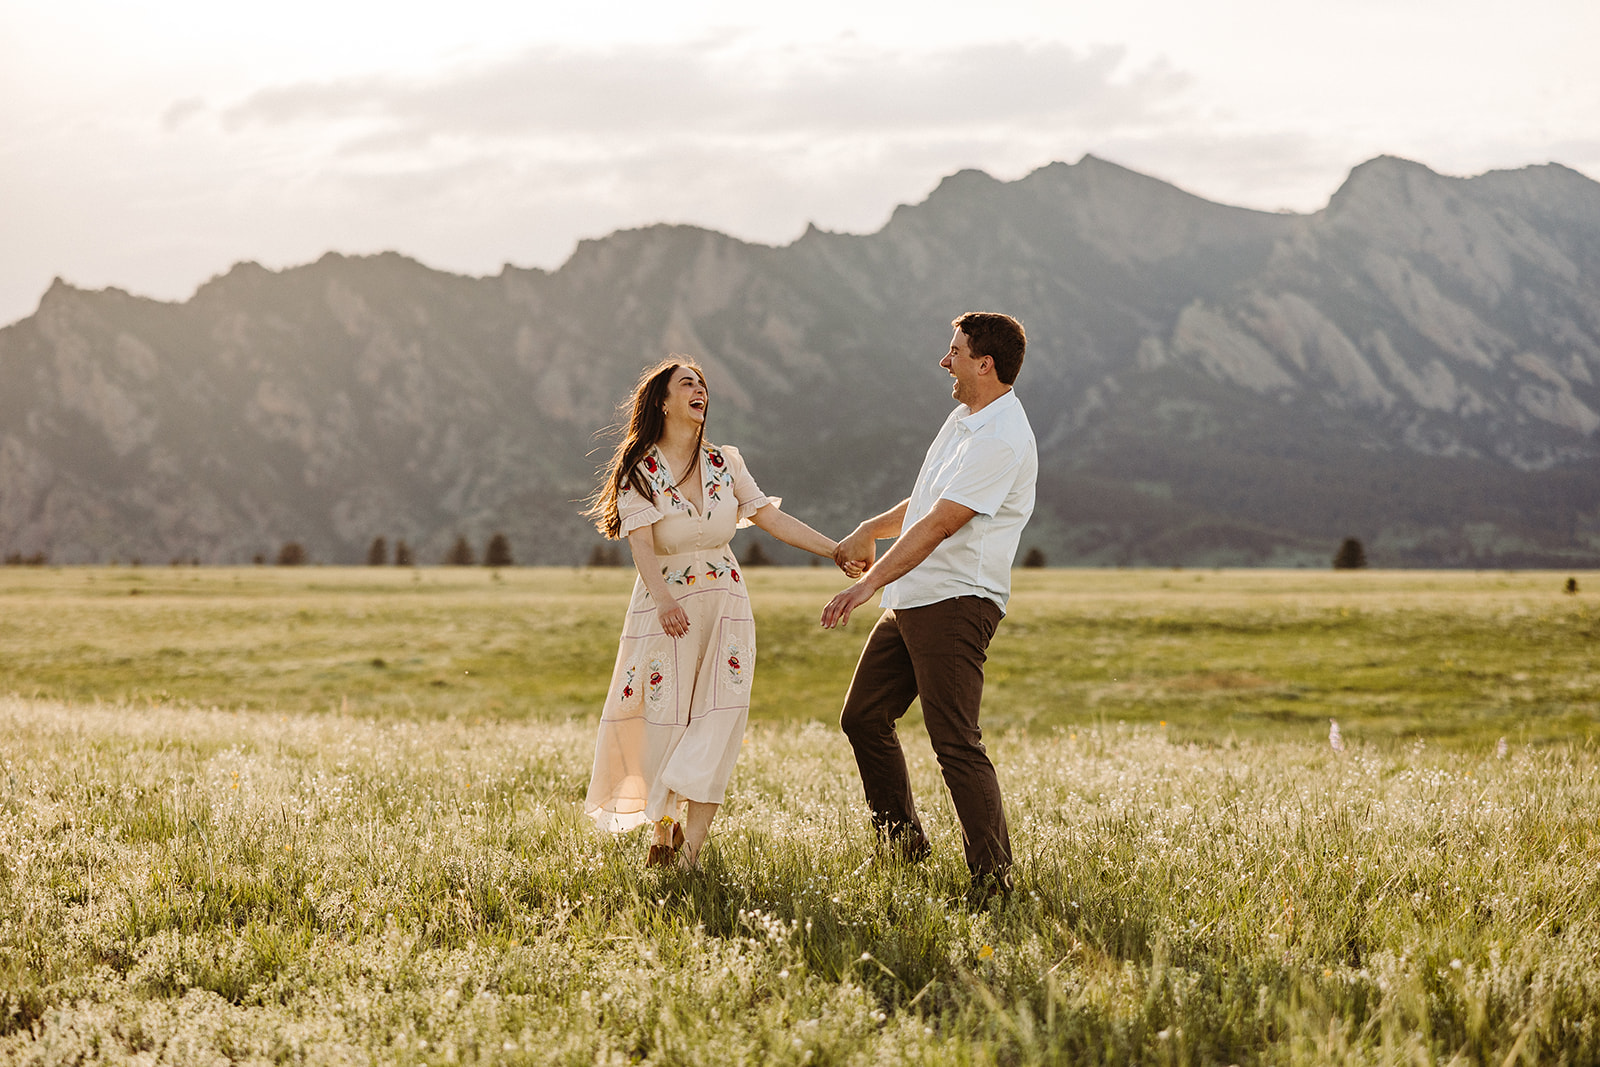 The sun shines on a couple while holding hands and beginning to dance in an open field before a mountain range